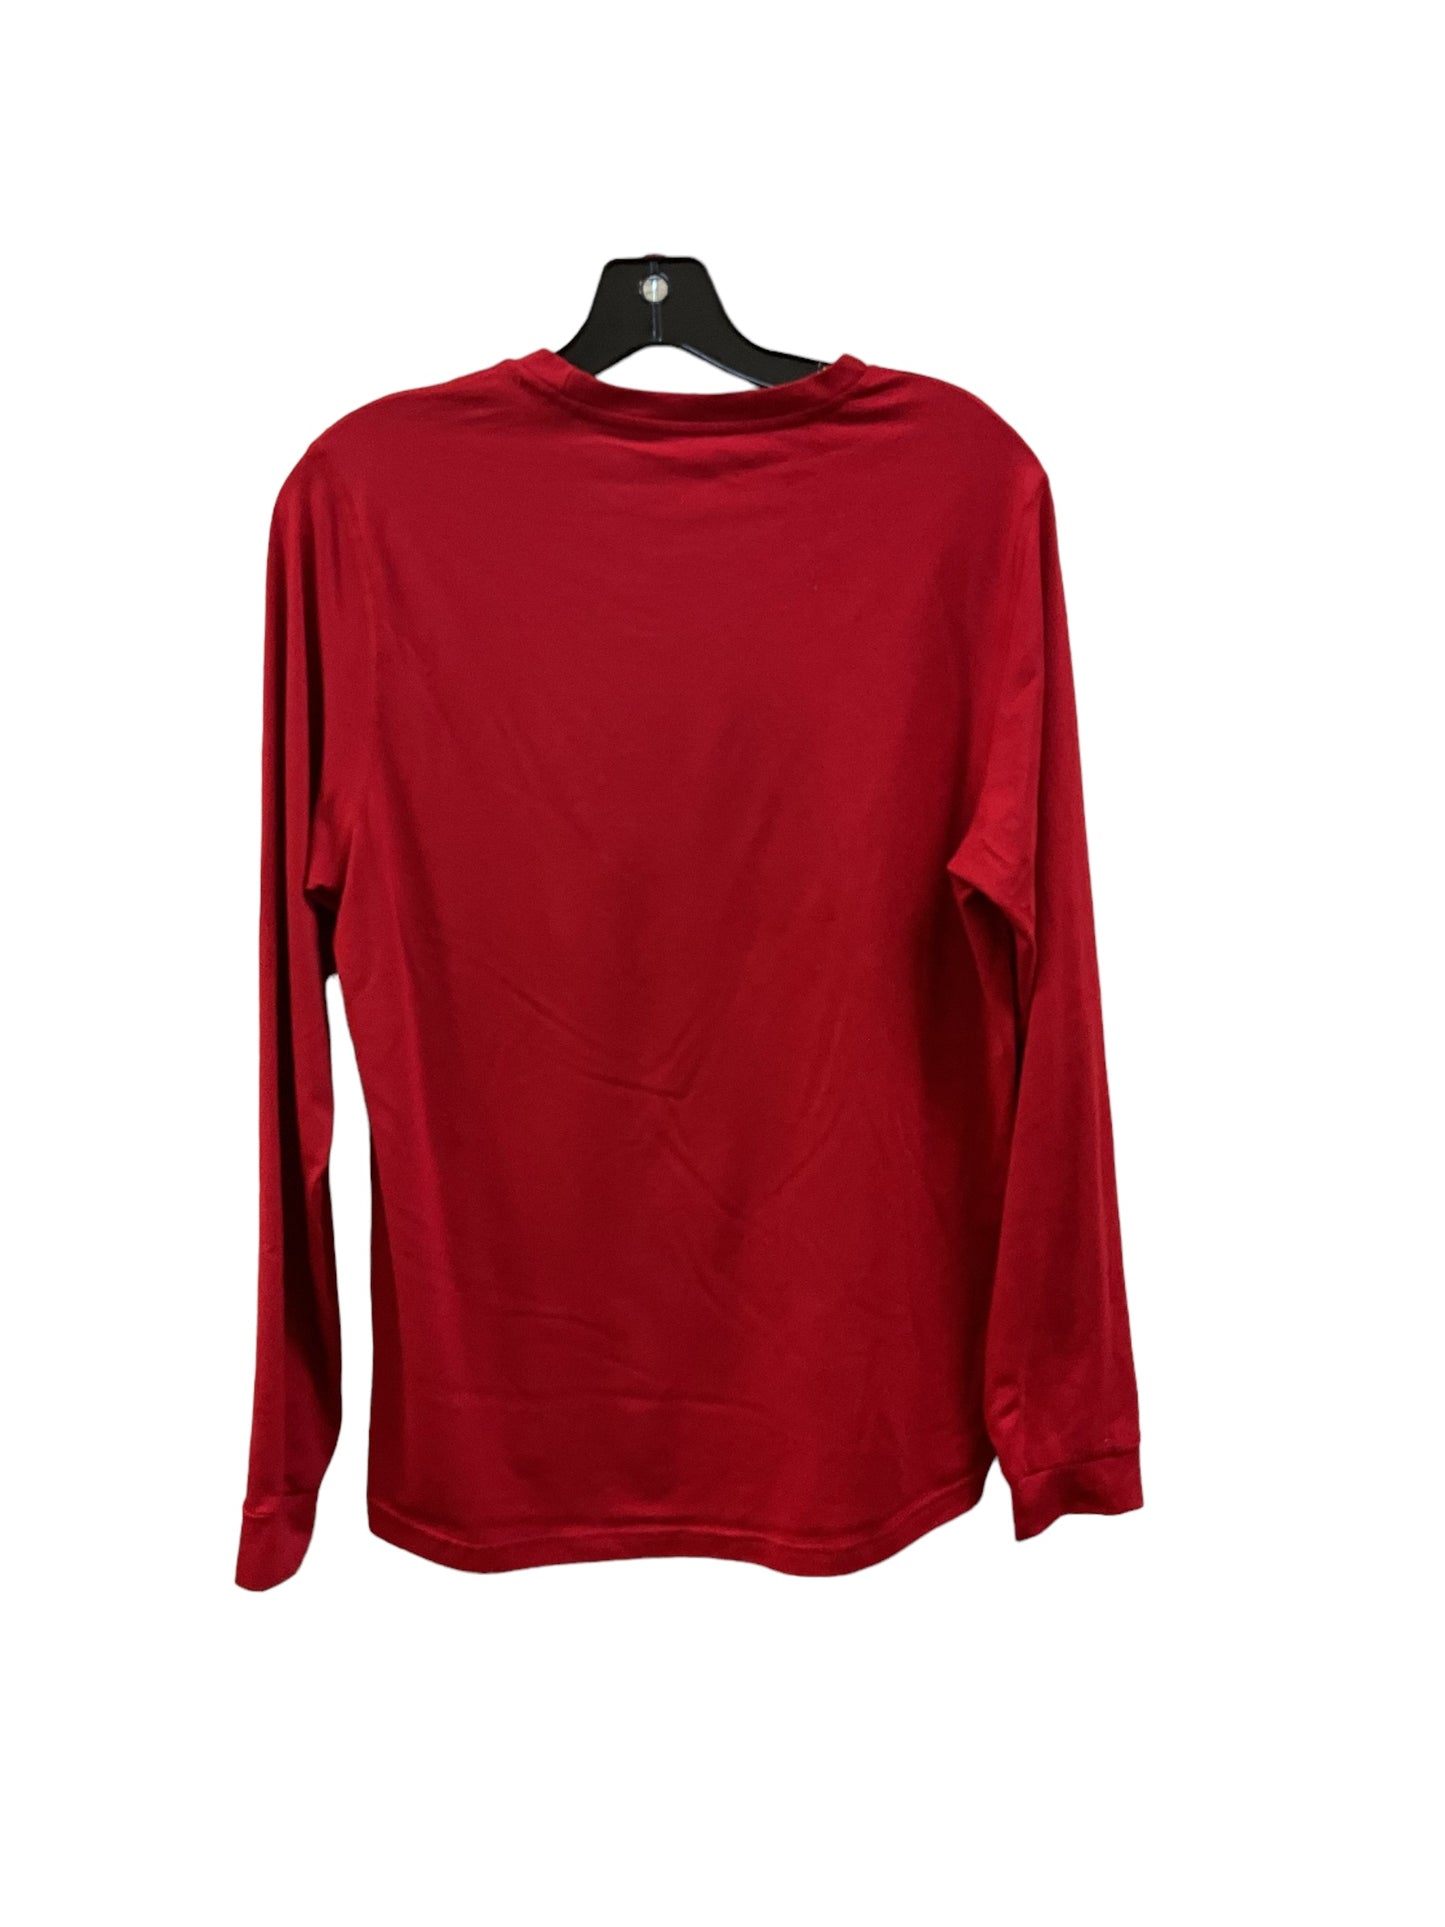 Top Long Sleeve By Adidas  Size: M